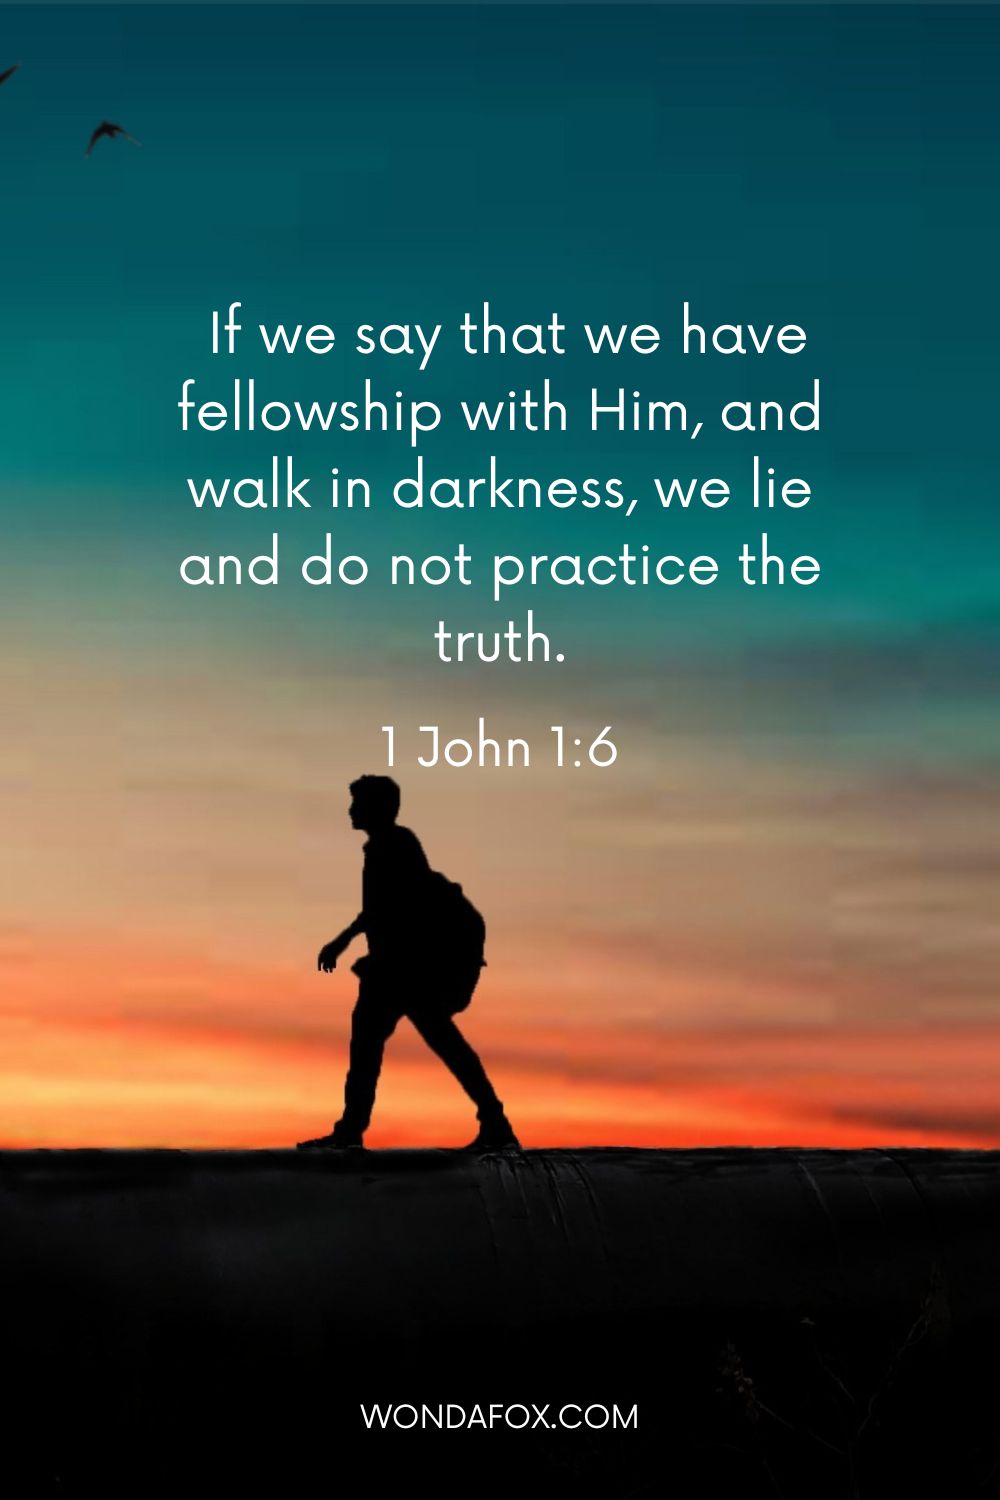  If we say that we have fellowship with Him, and walk in darkness, we lie and do not practice the truth. - Bible Verses About Hatred